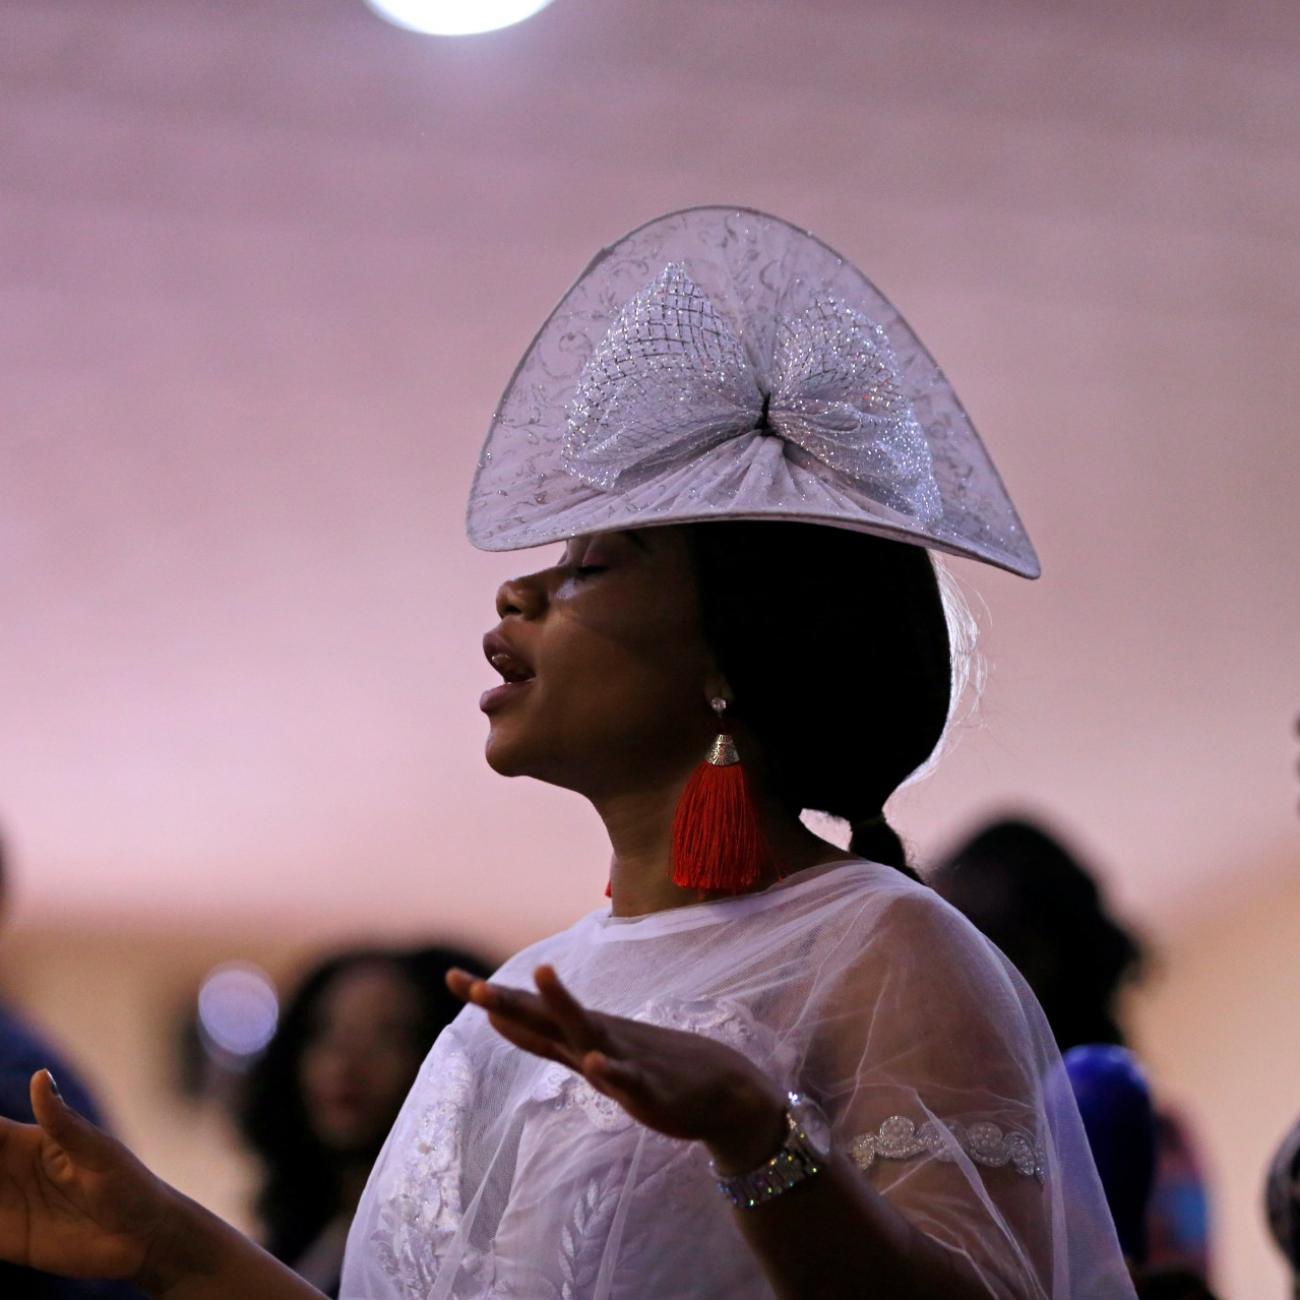 A woman attends a church service at Living Faith Church, following the outbreak of the coronavirus disease (COVID-19), in Abuja, Nigeria March 22, 2020